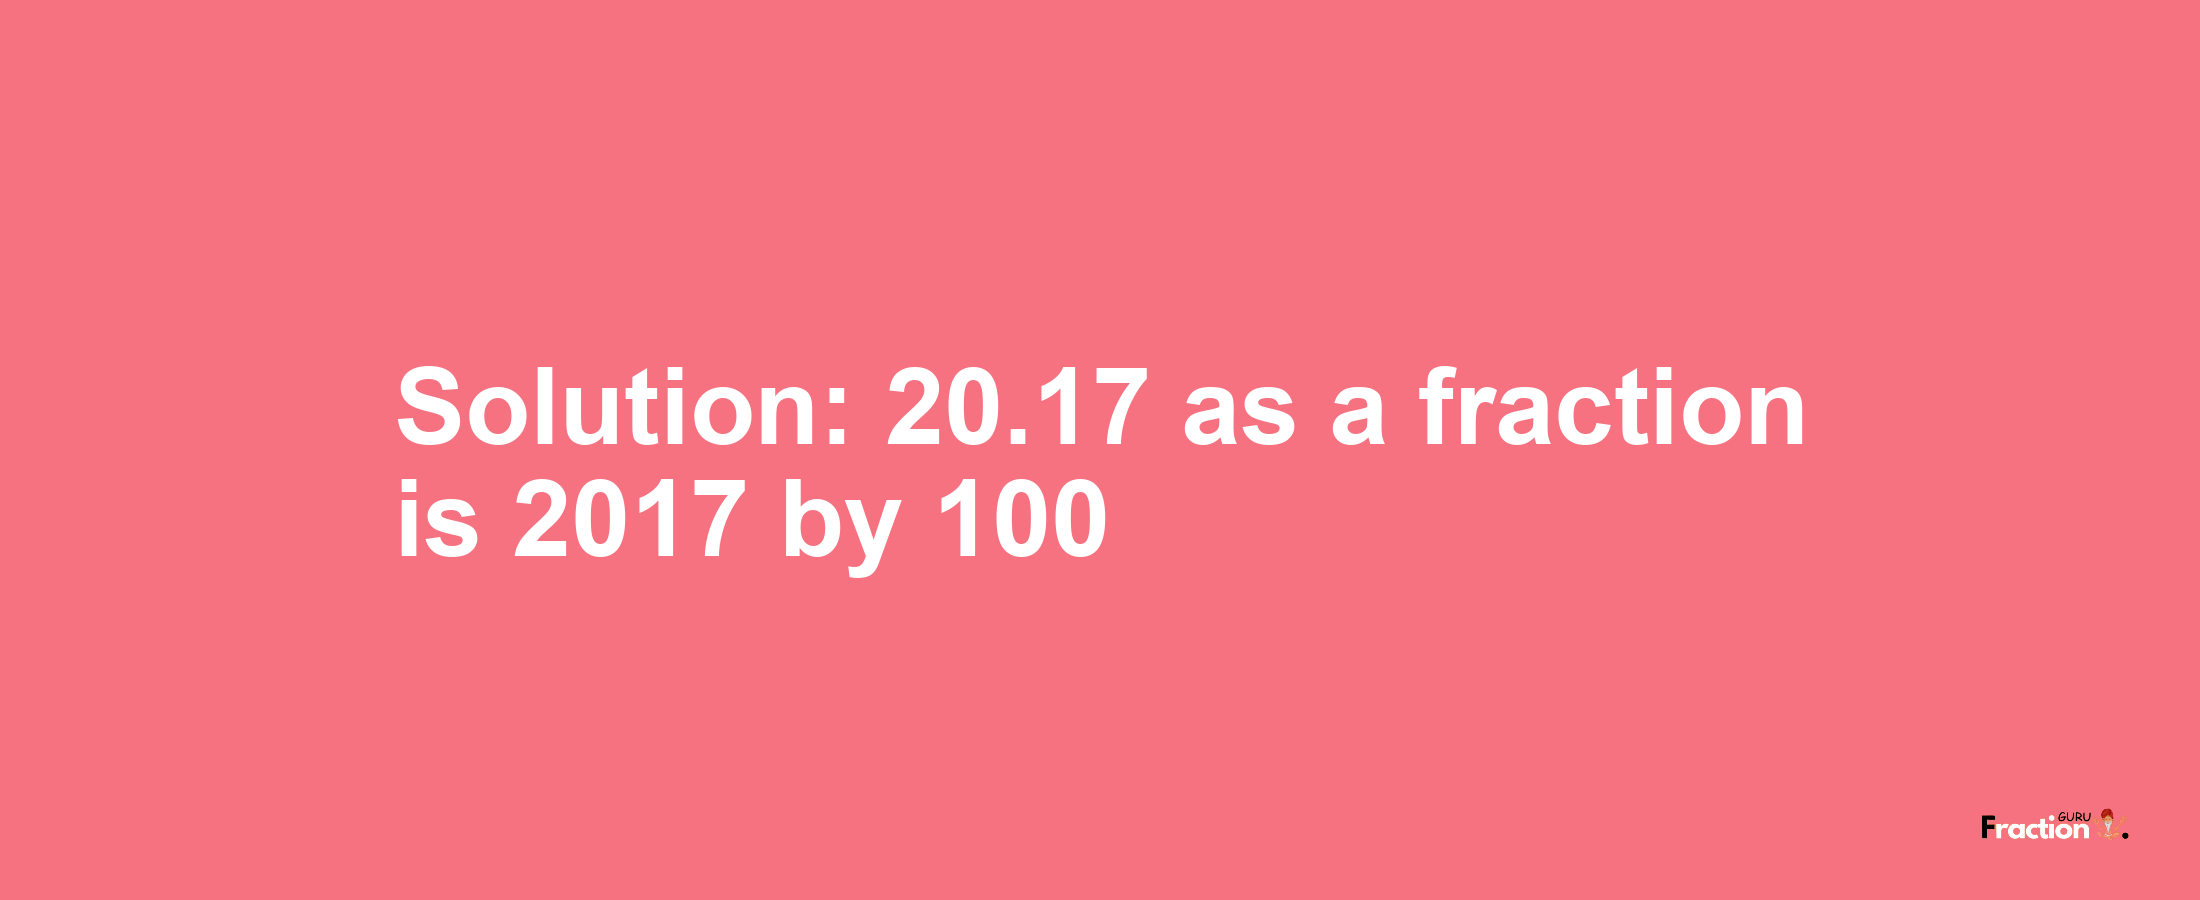 Solution:20.17 as a fraction is 2017/100